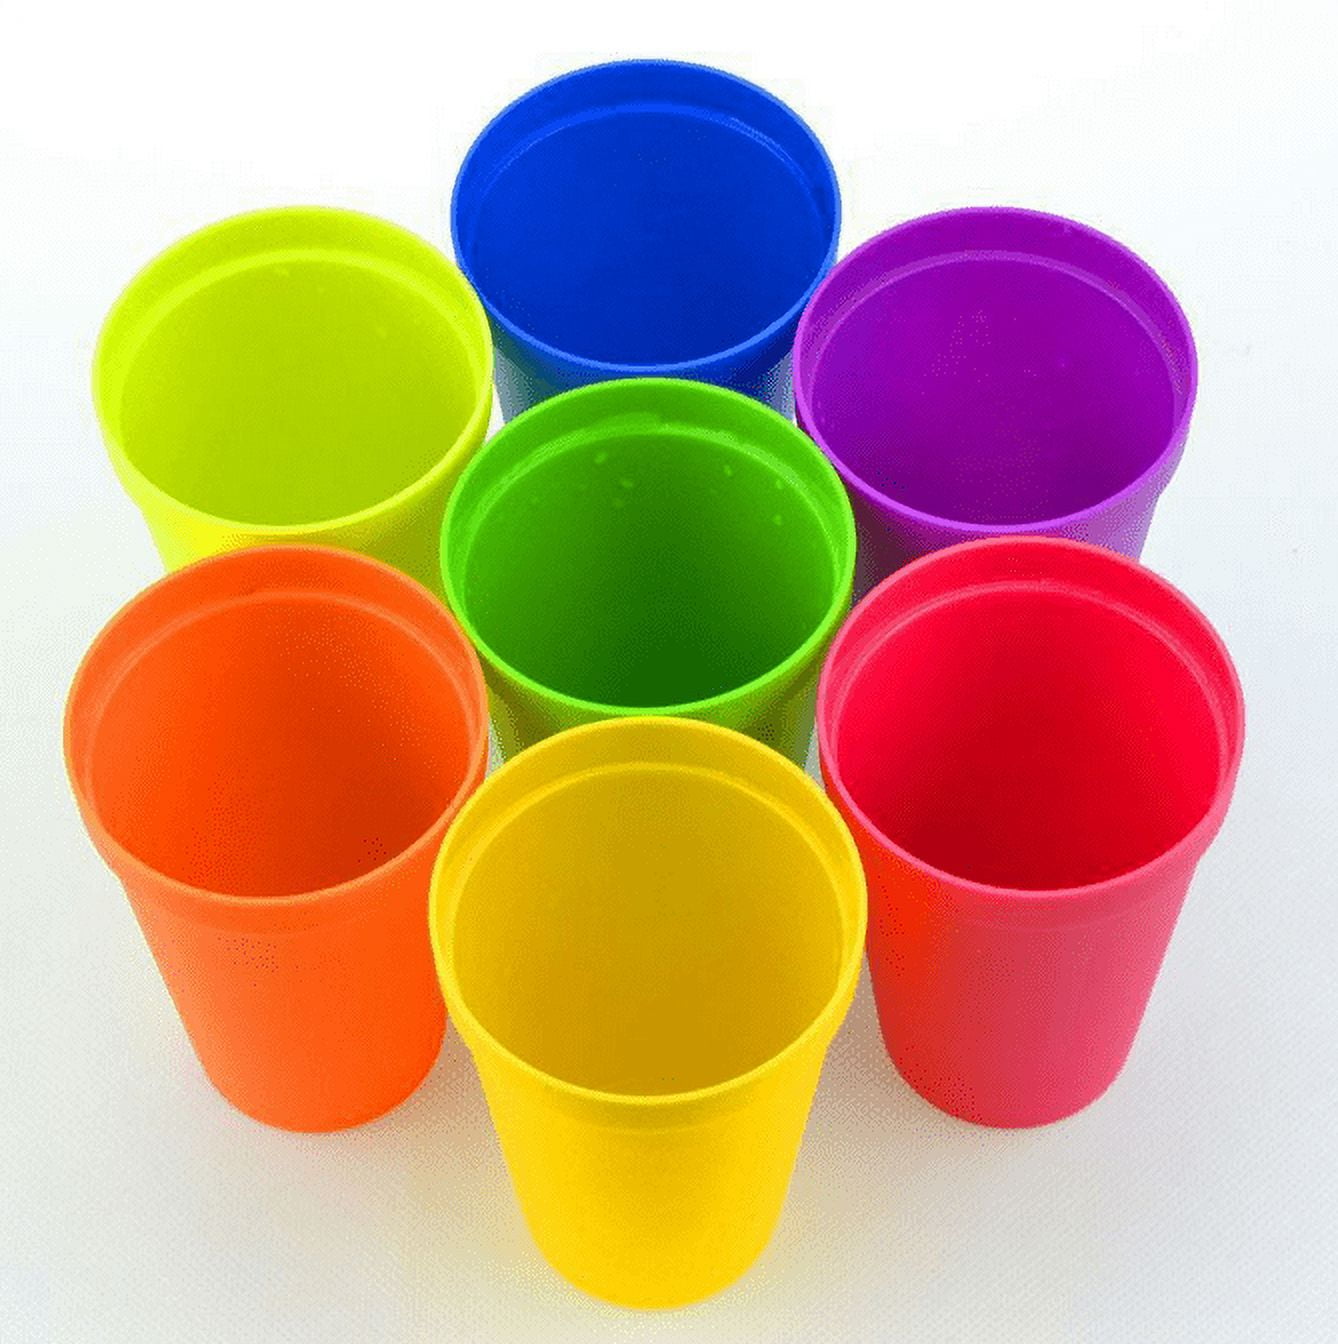 WEXINHAO Drinking Cups Reusable - Unbreakable Thick Wall Tall Kitchen Cups  set of 8 - BPA Free Dishw…See more WEXINHAO Drinking Cups Reusable 